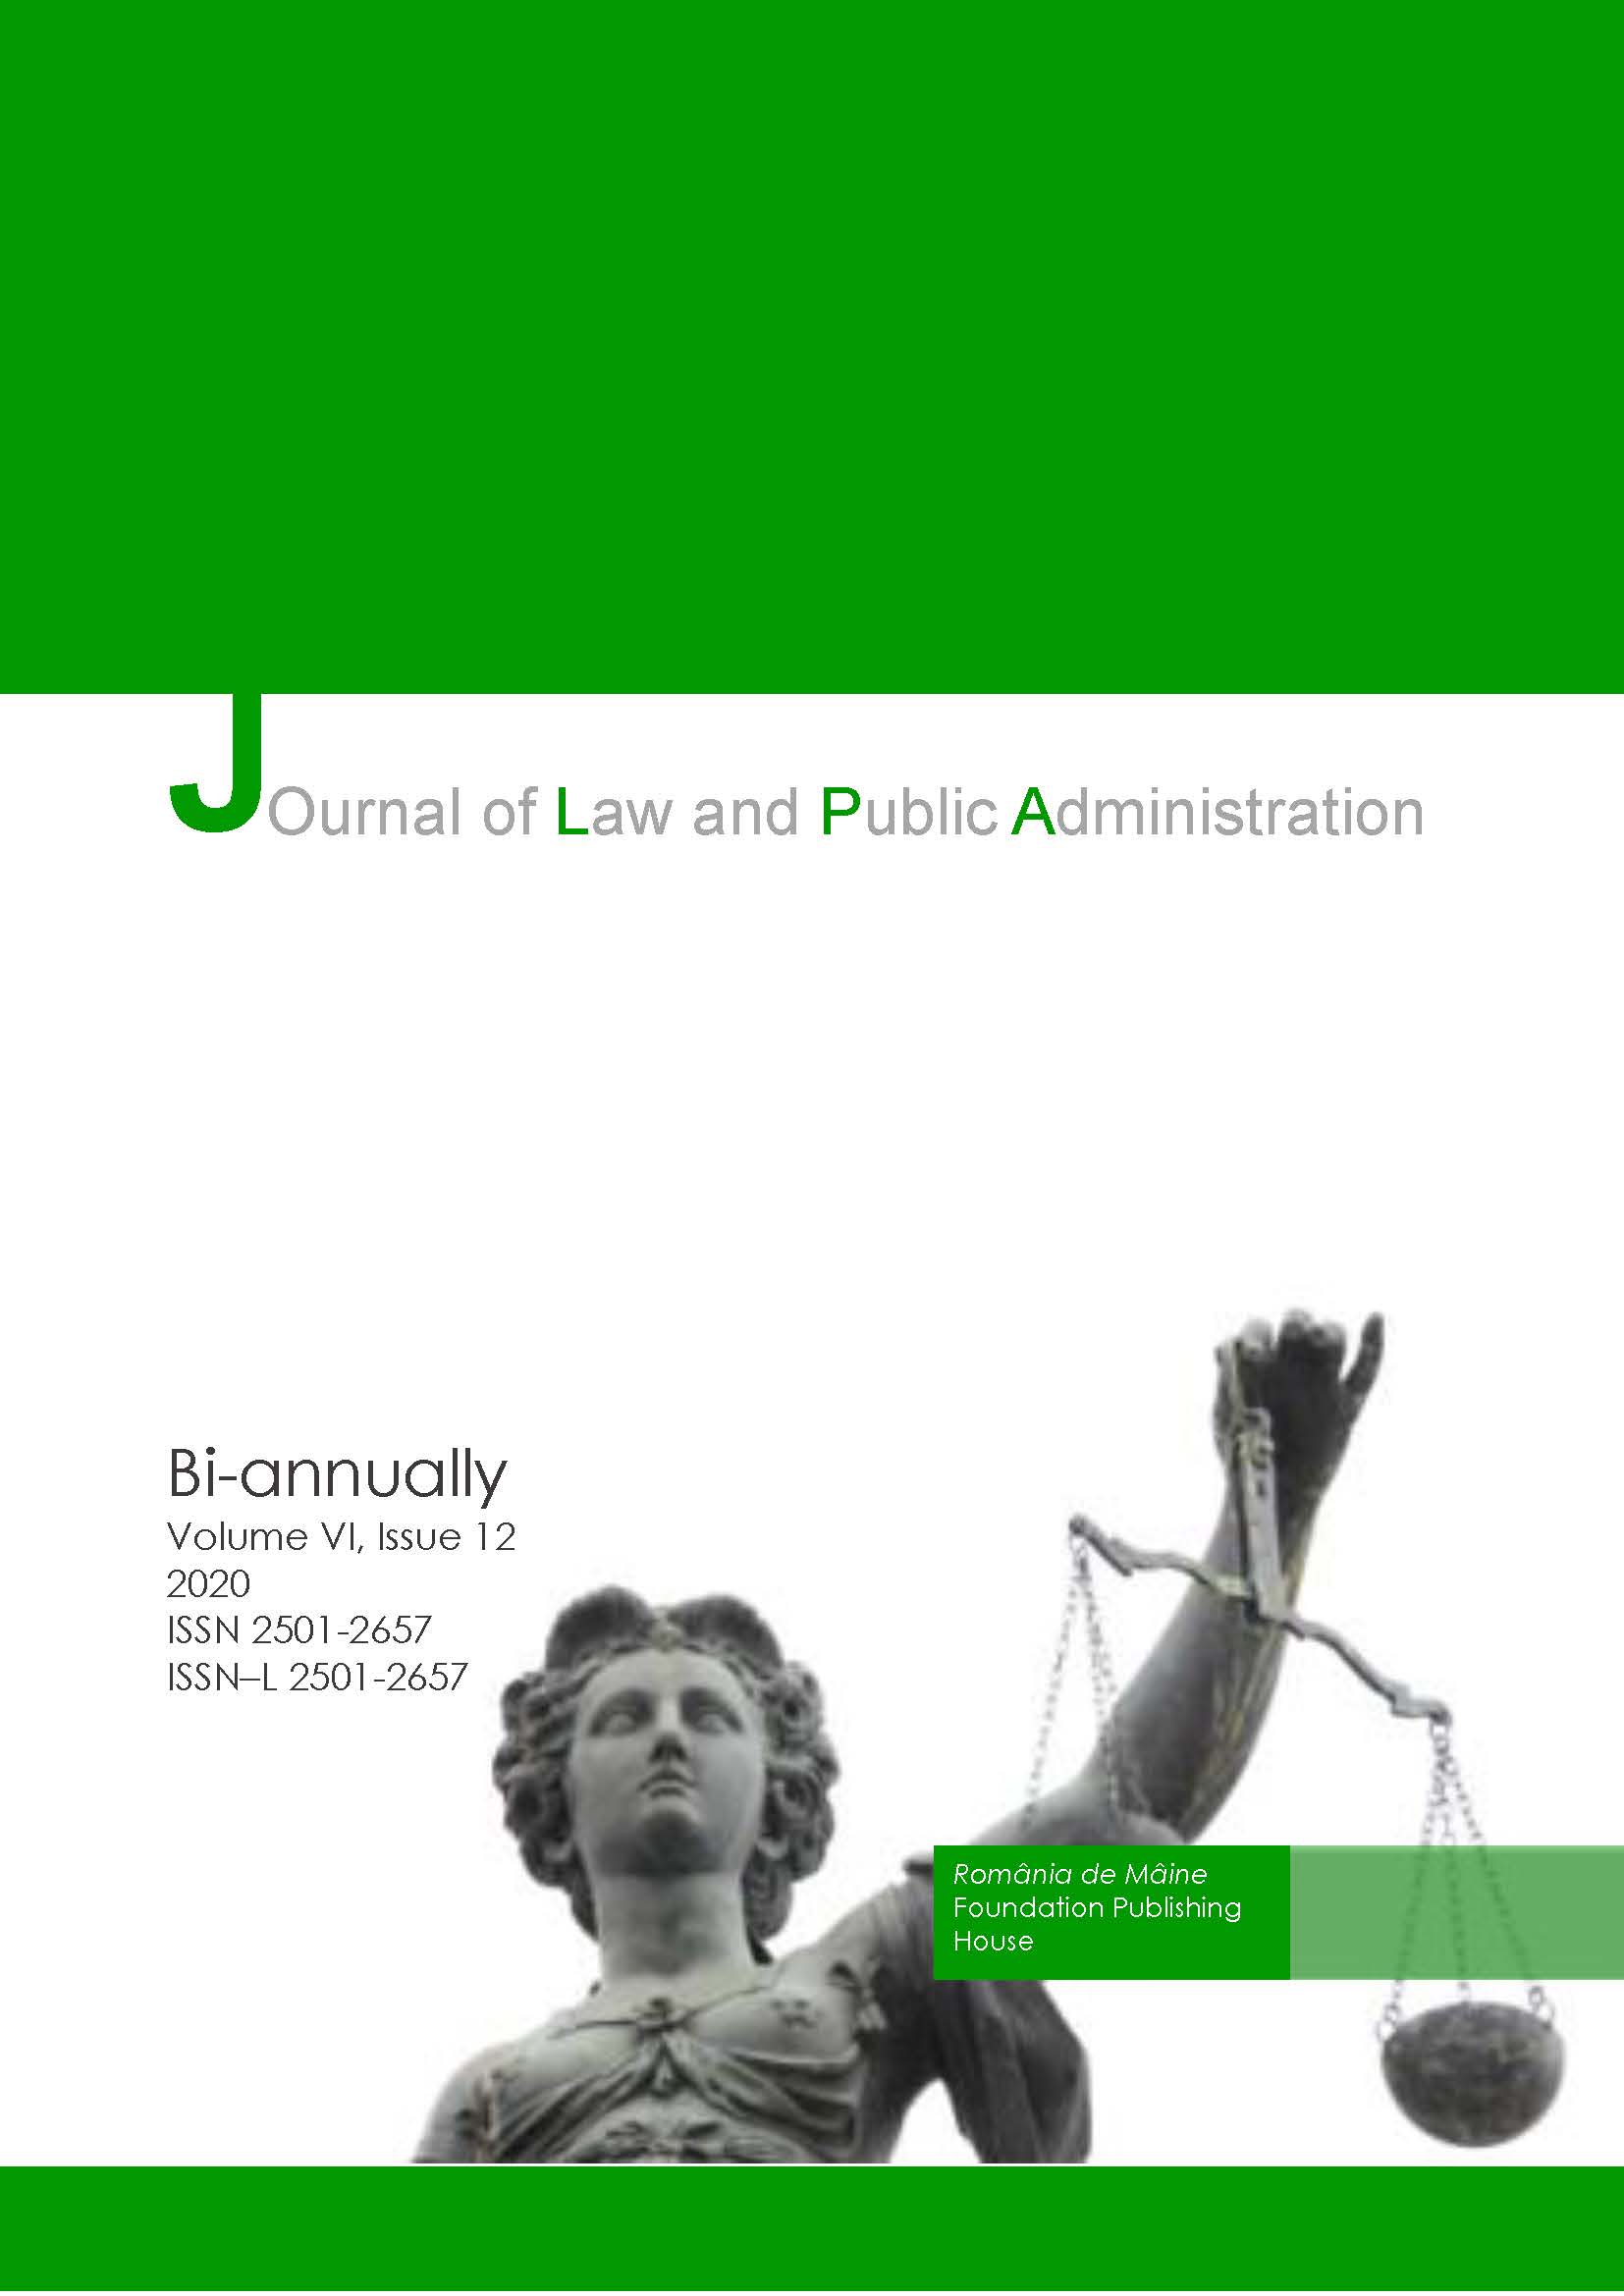 The Normative Inflationary Phenomenon and the Law no. 285/2004 on Copyright and Related Rights Cover Image